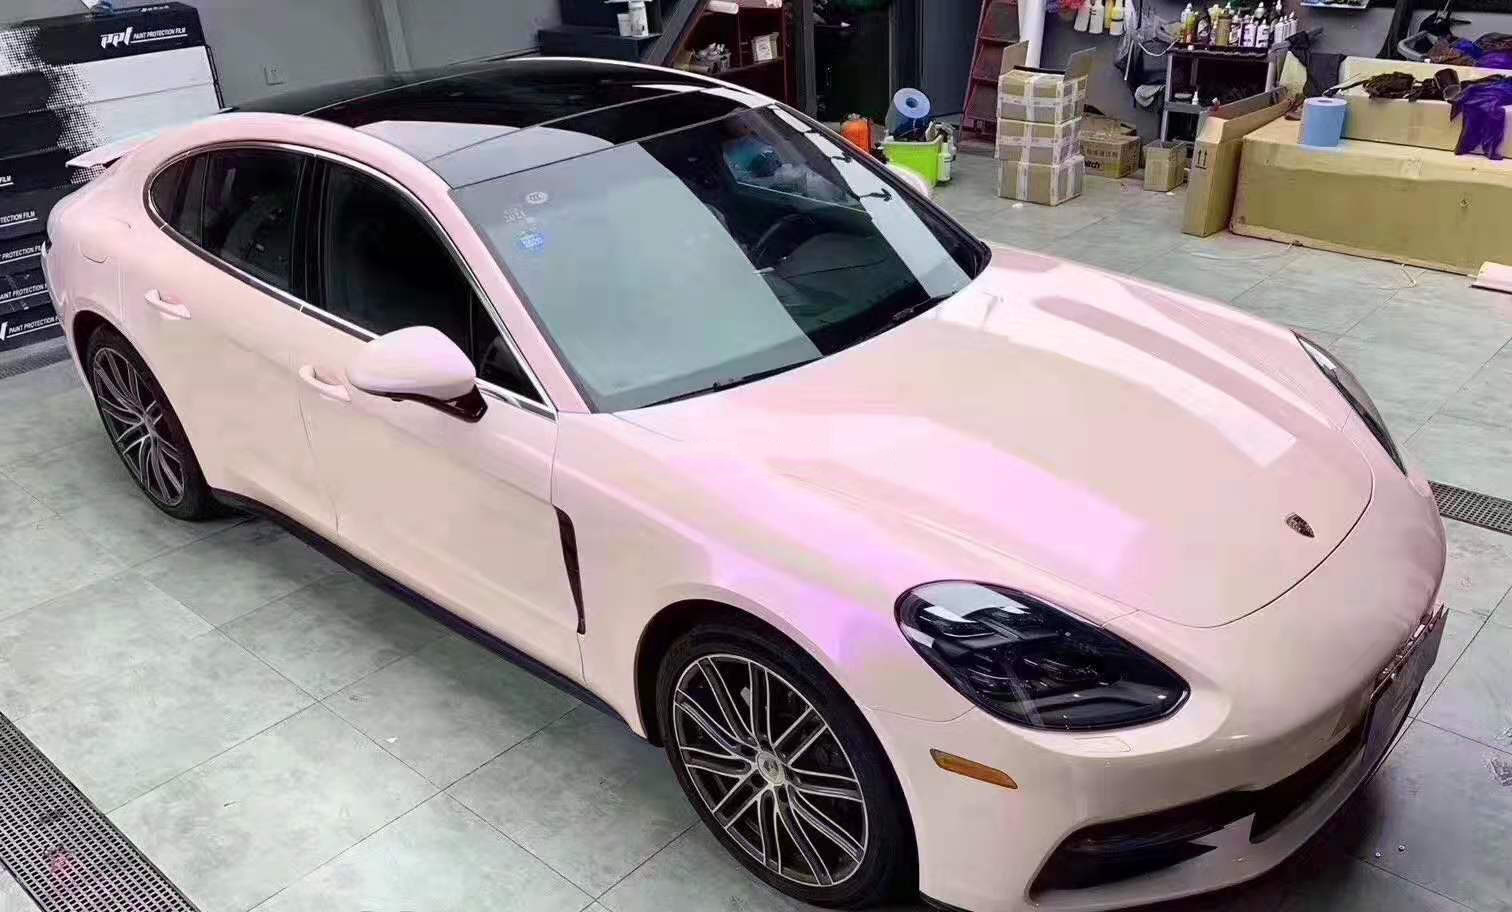 Super Gloss Candy Pink Color Shifting Vinyl Wrap